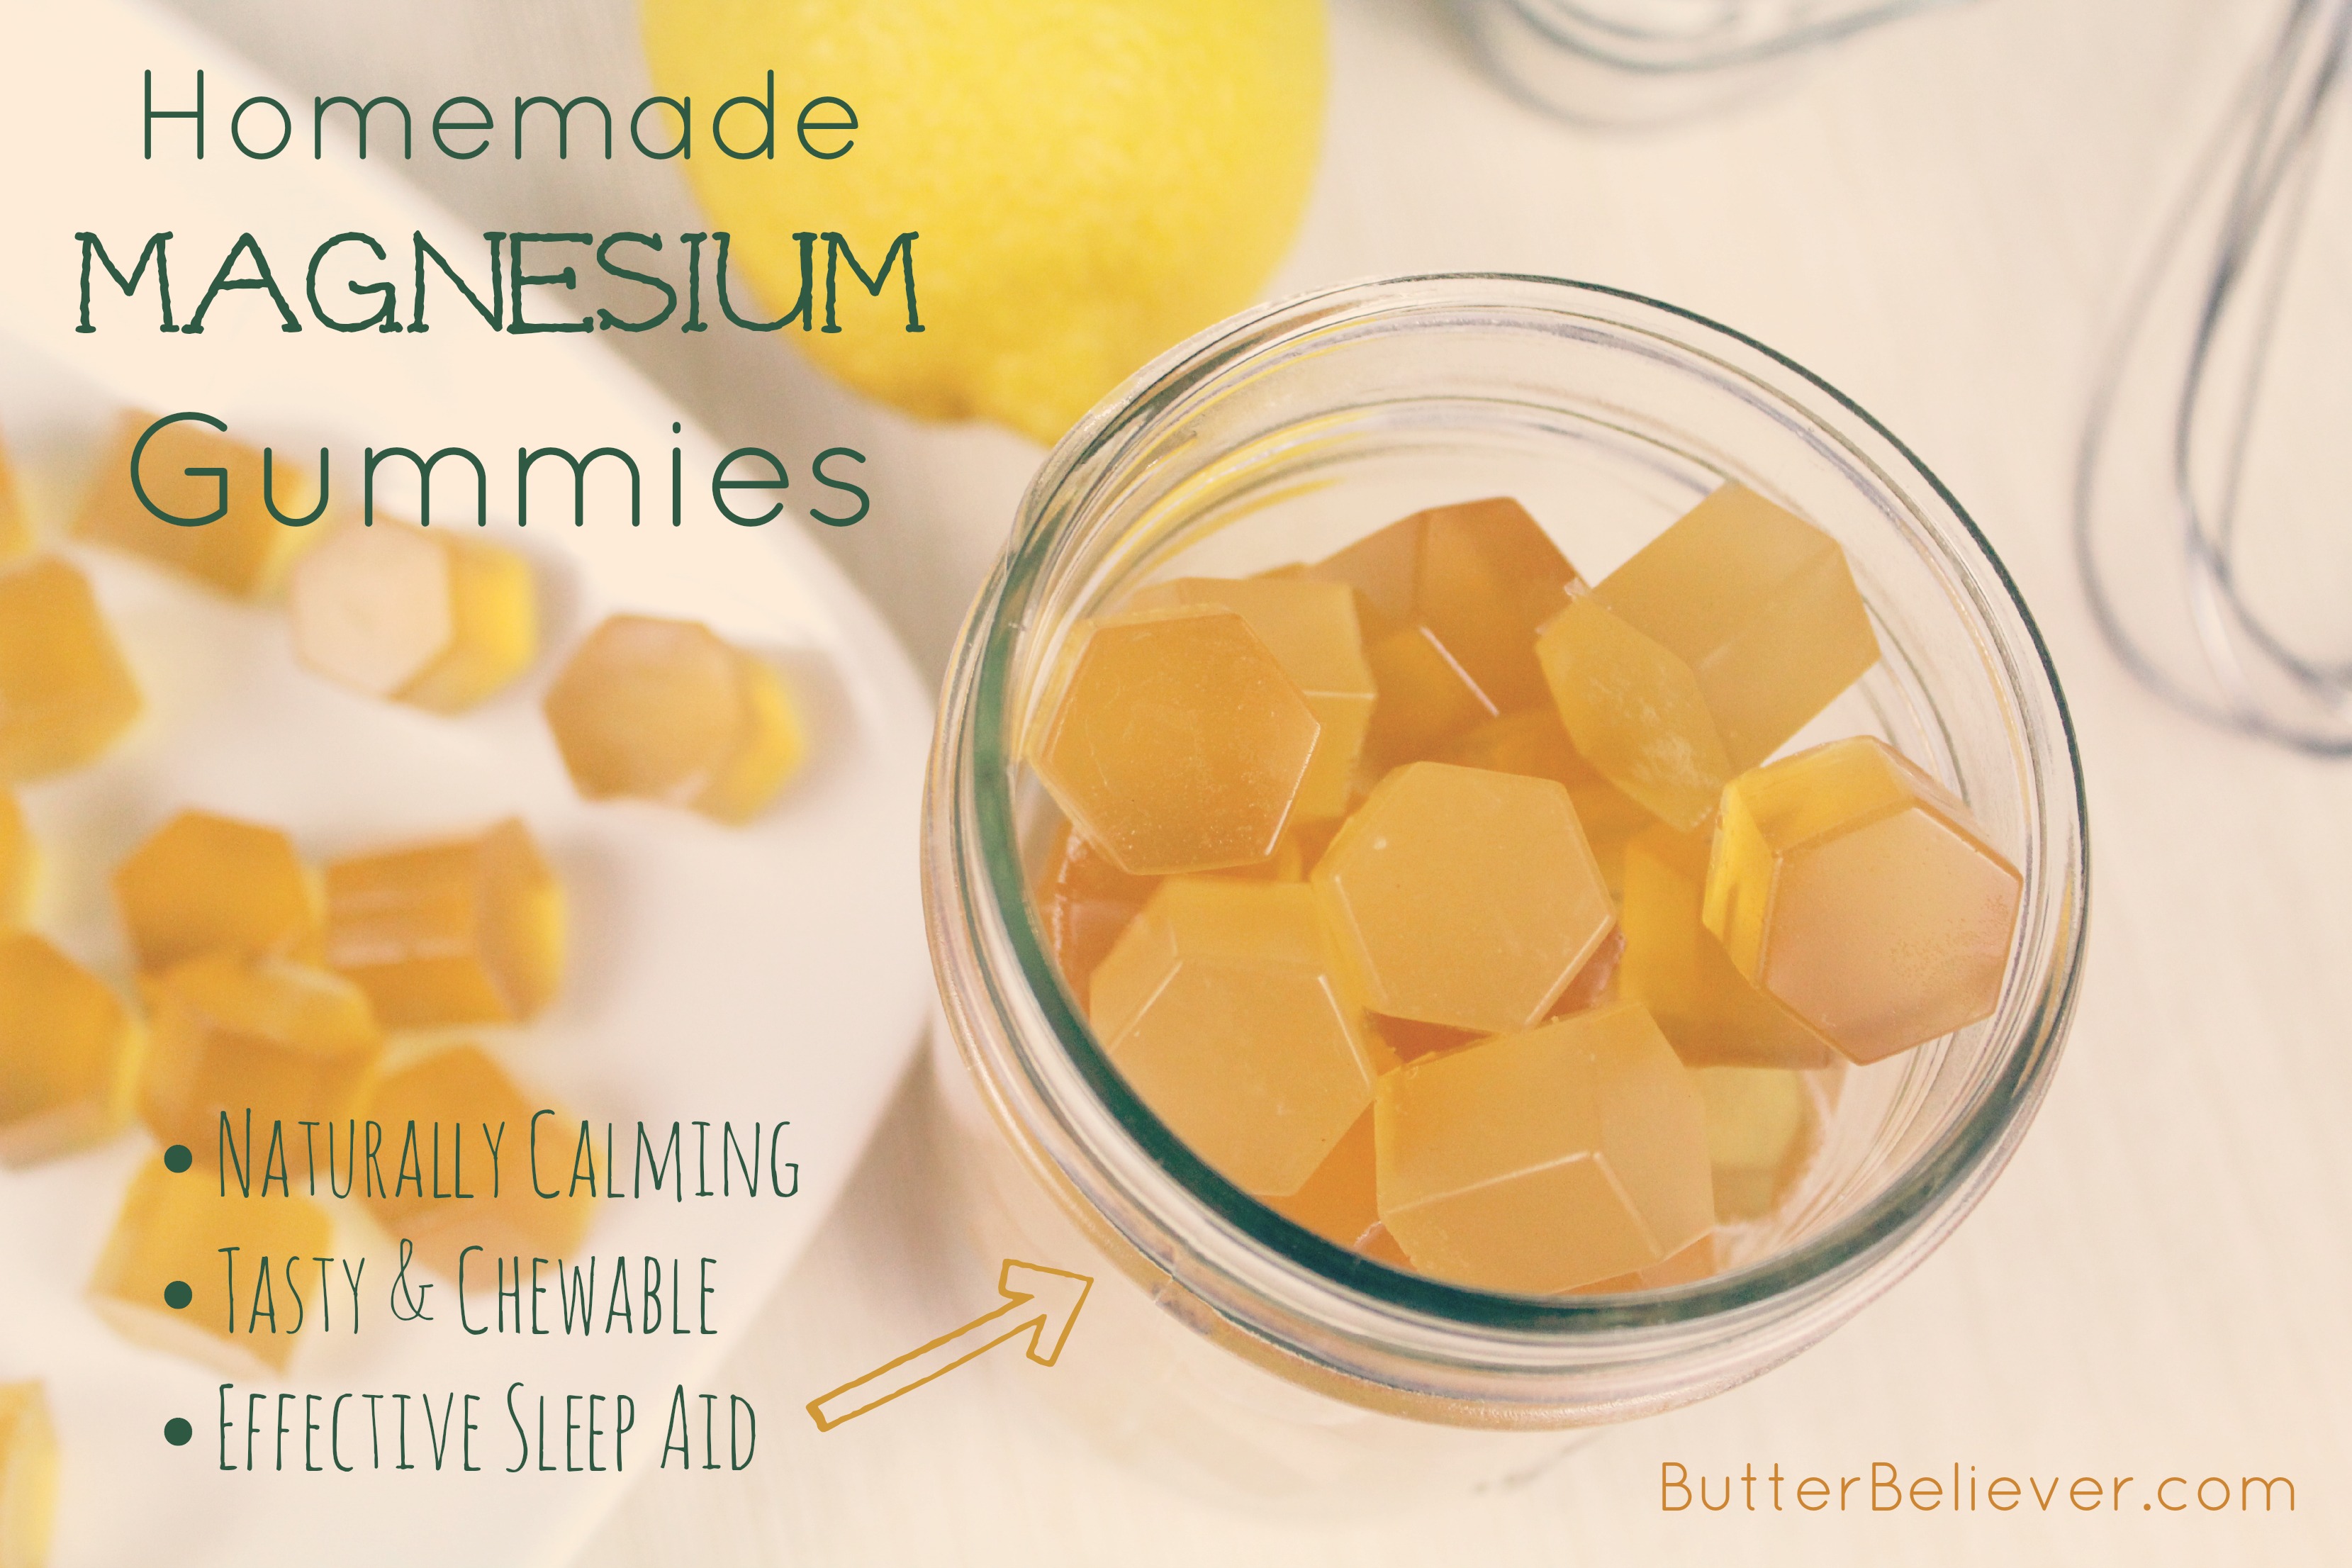 Homemade Magnesium Gummies—A Chewable